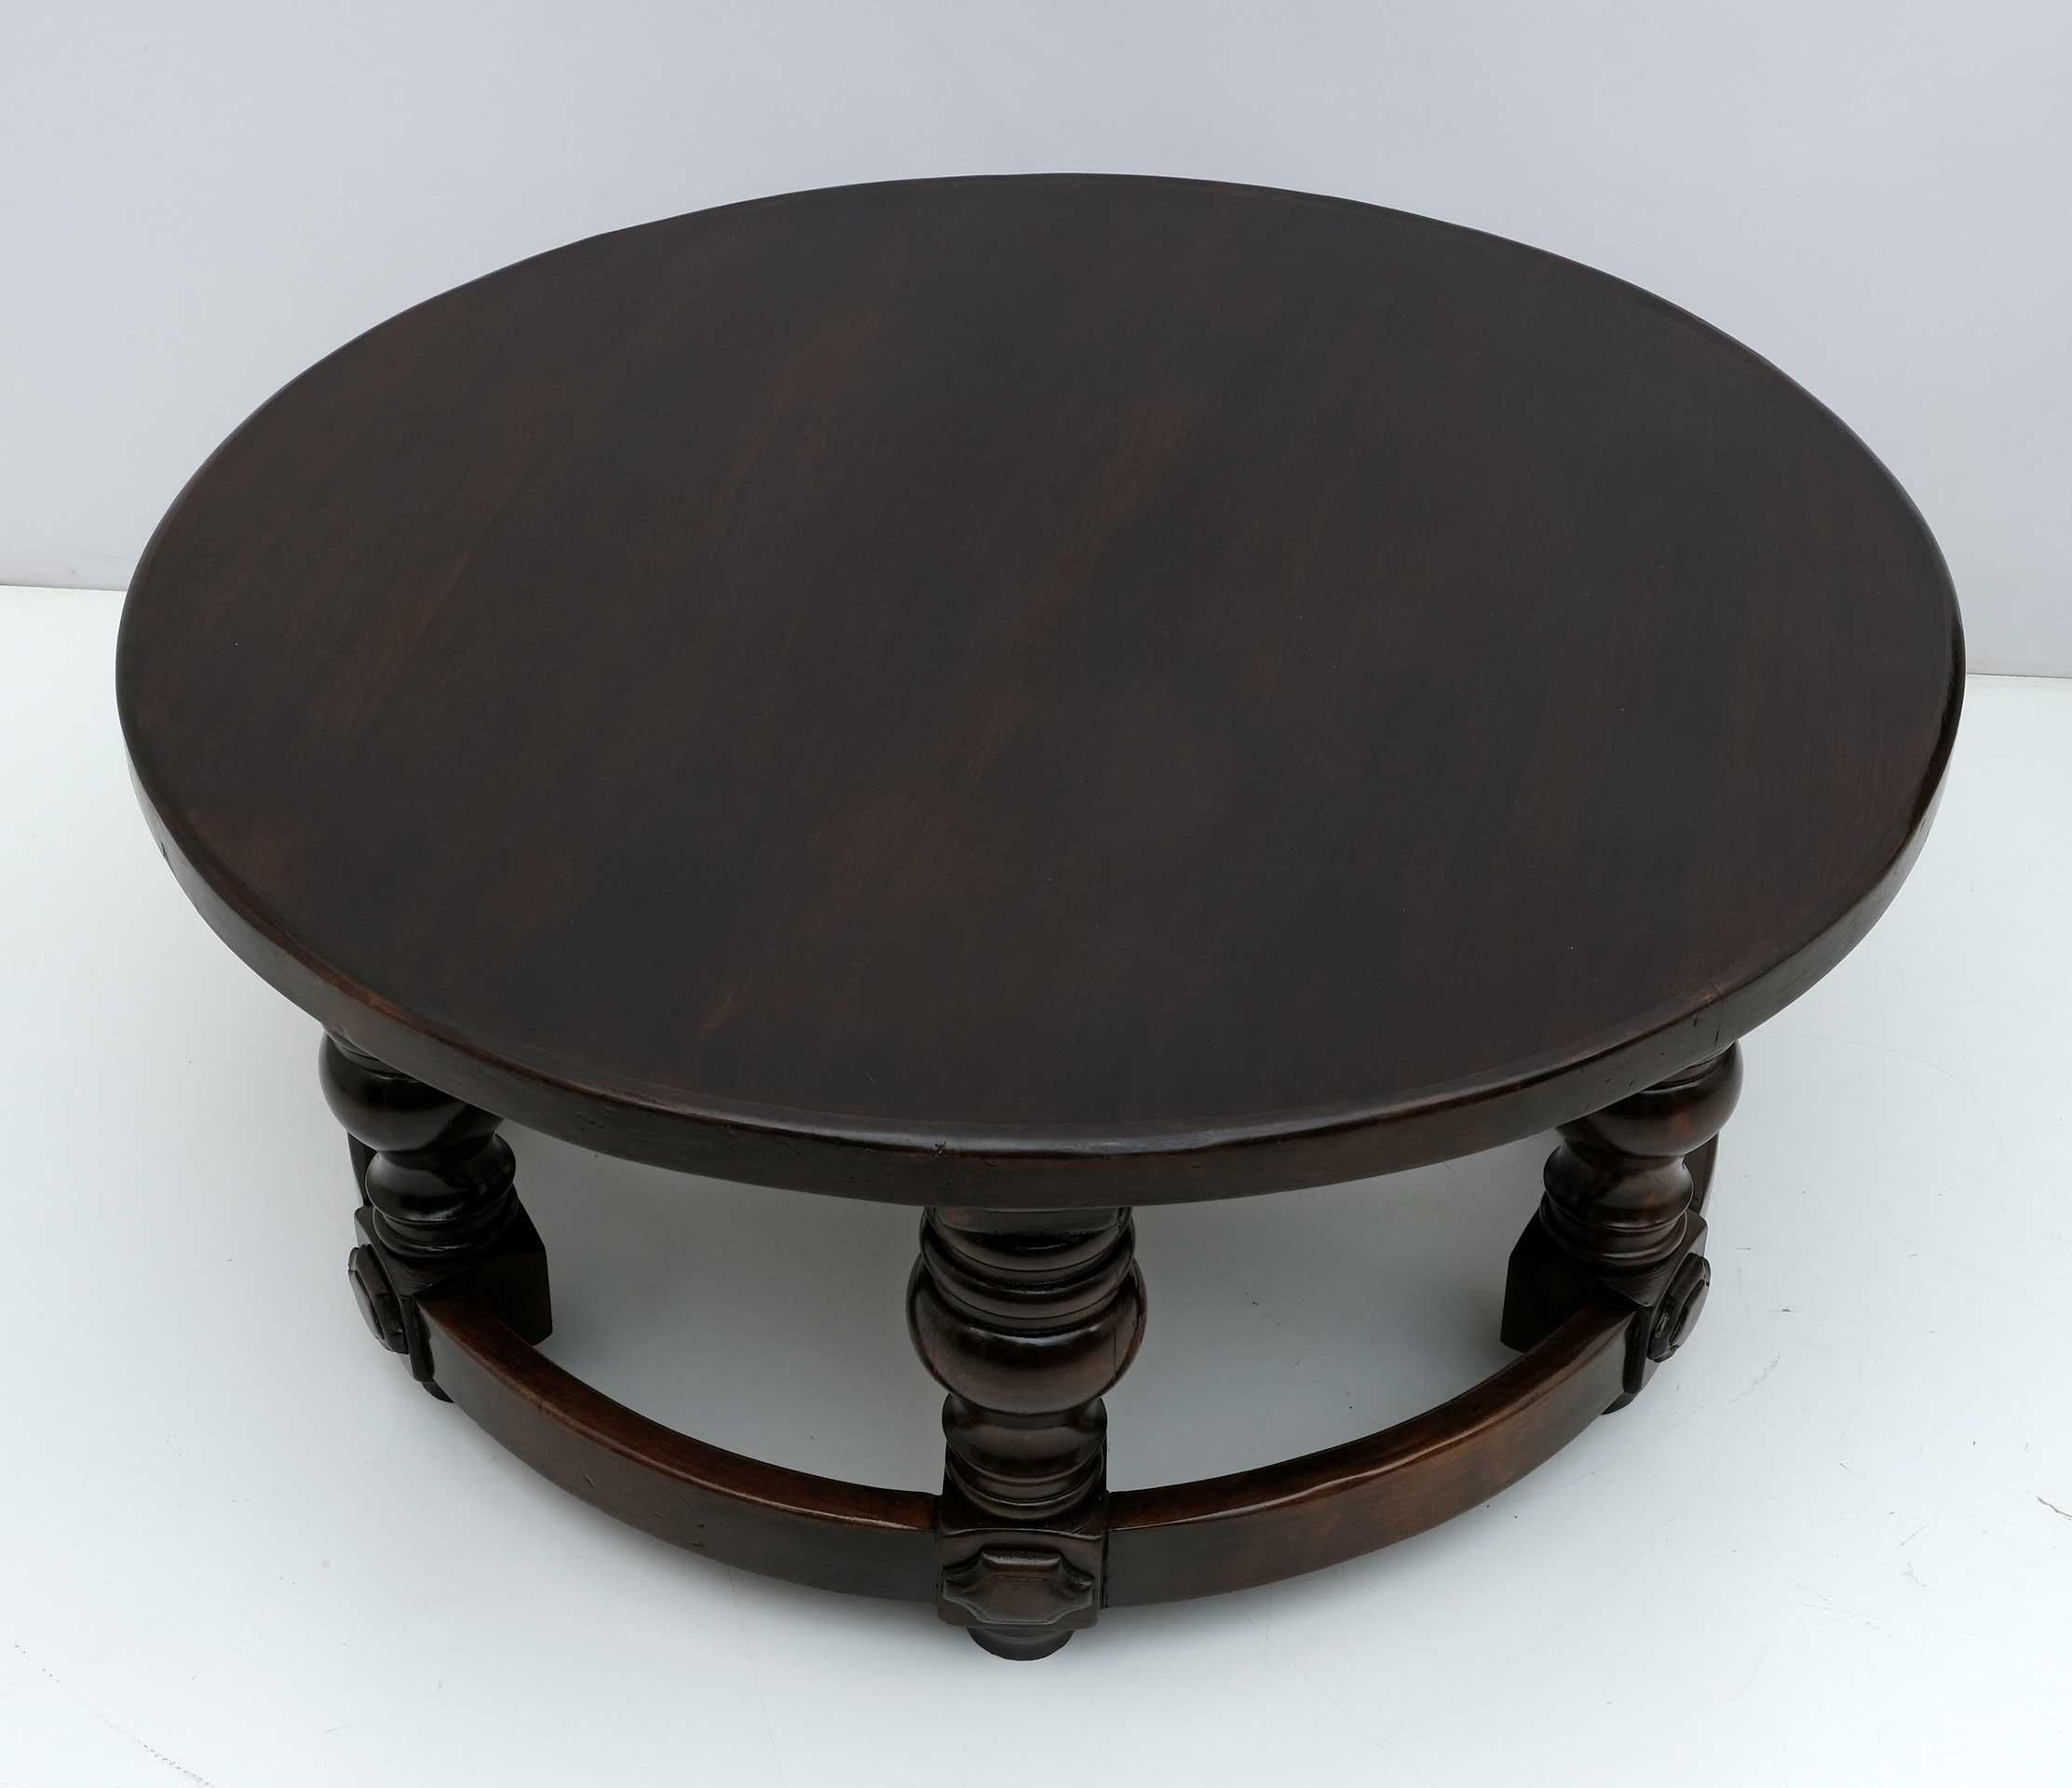 20th Century Louis XIII style solid walnut round coffee table, fully restored and shellac polished.